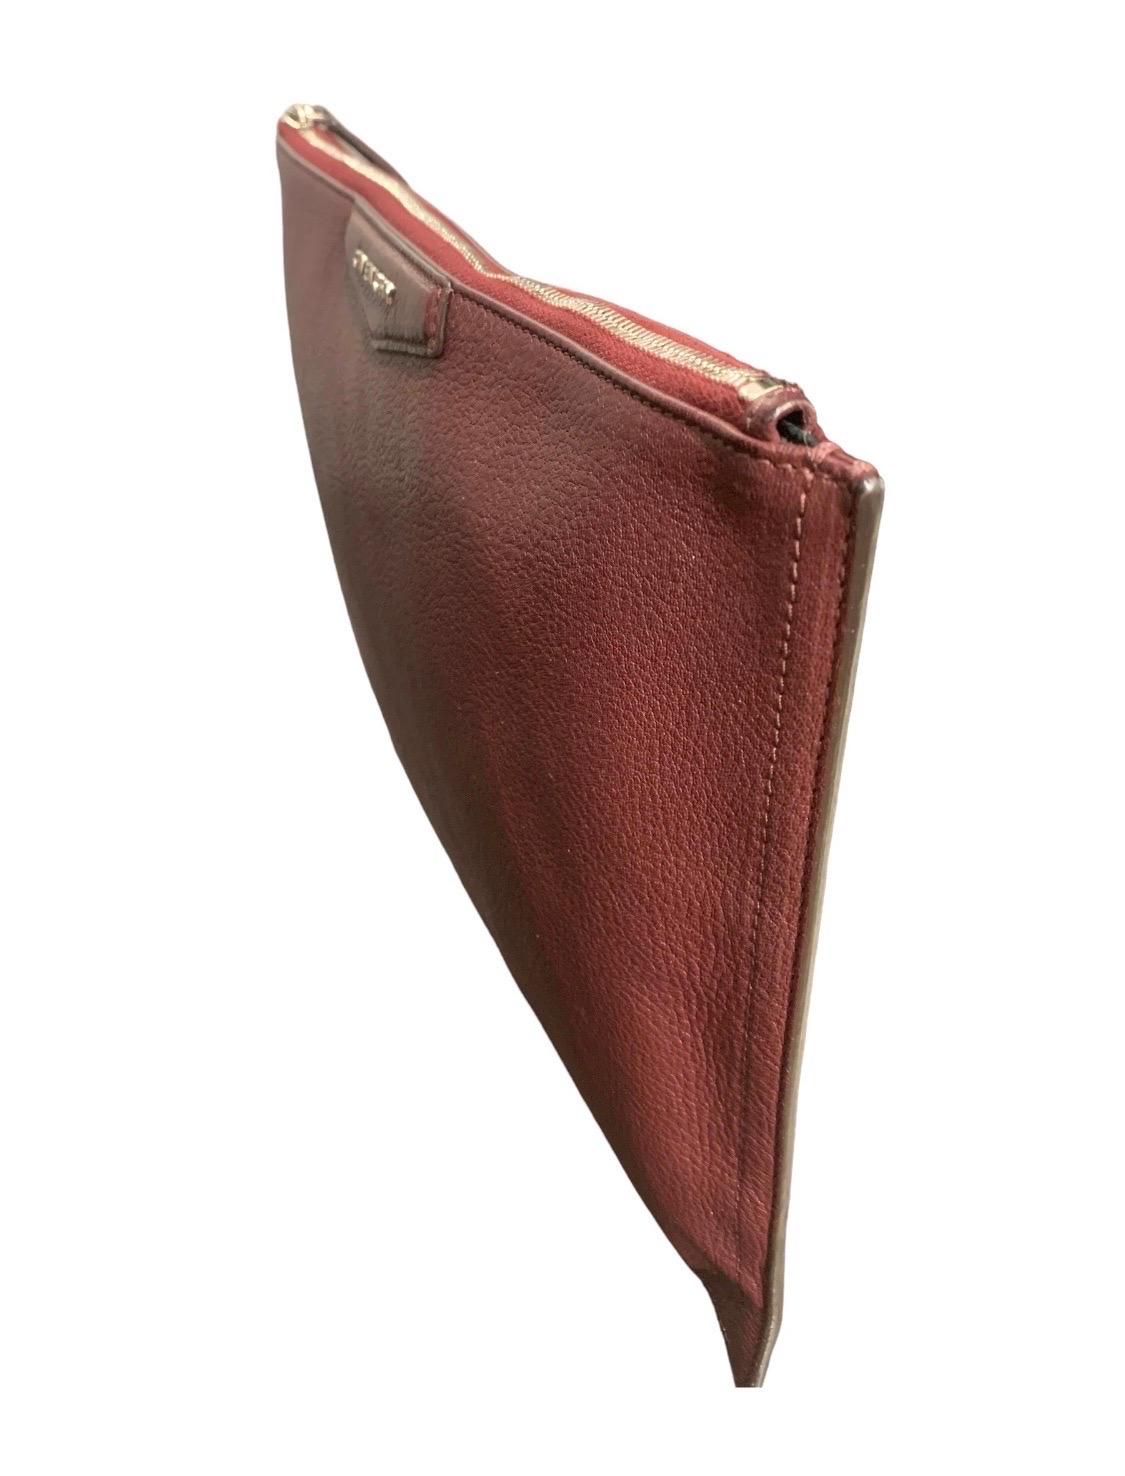 Givenchy Antigona Clutch Bordeaux In Good Condition For Sale In Torre Del Greco, IT